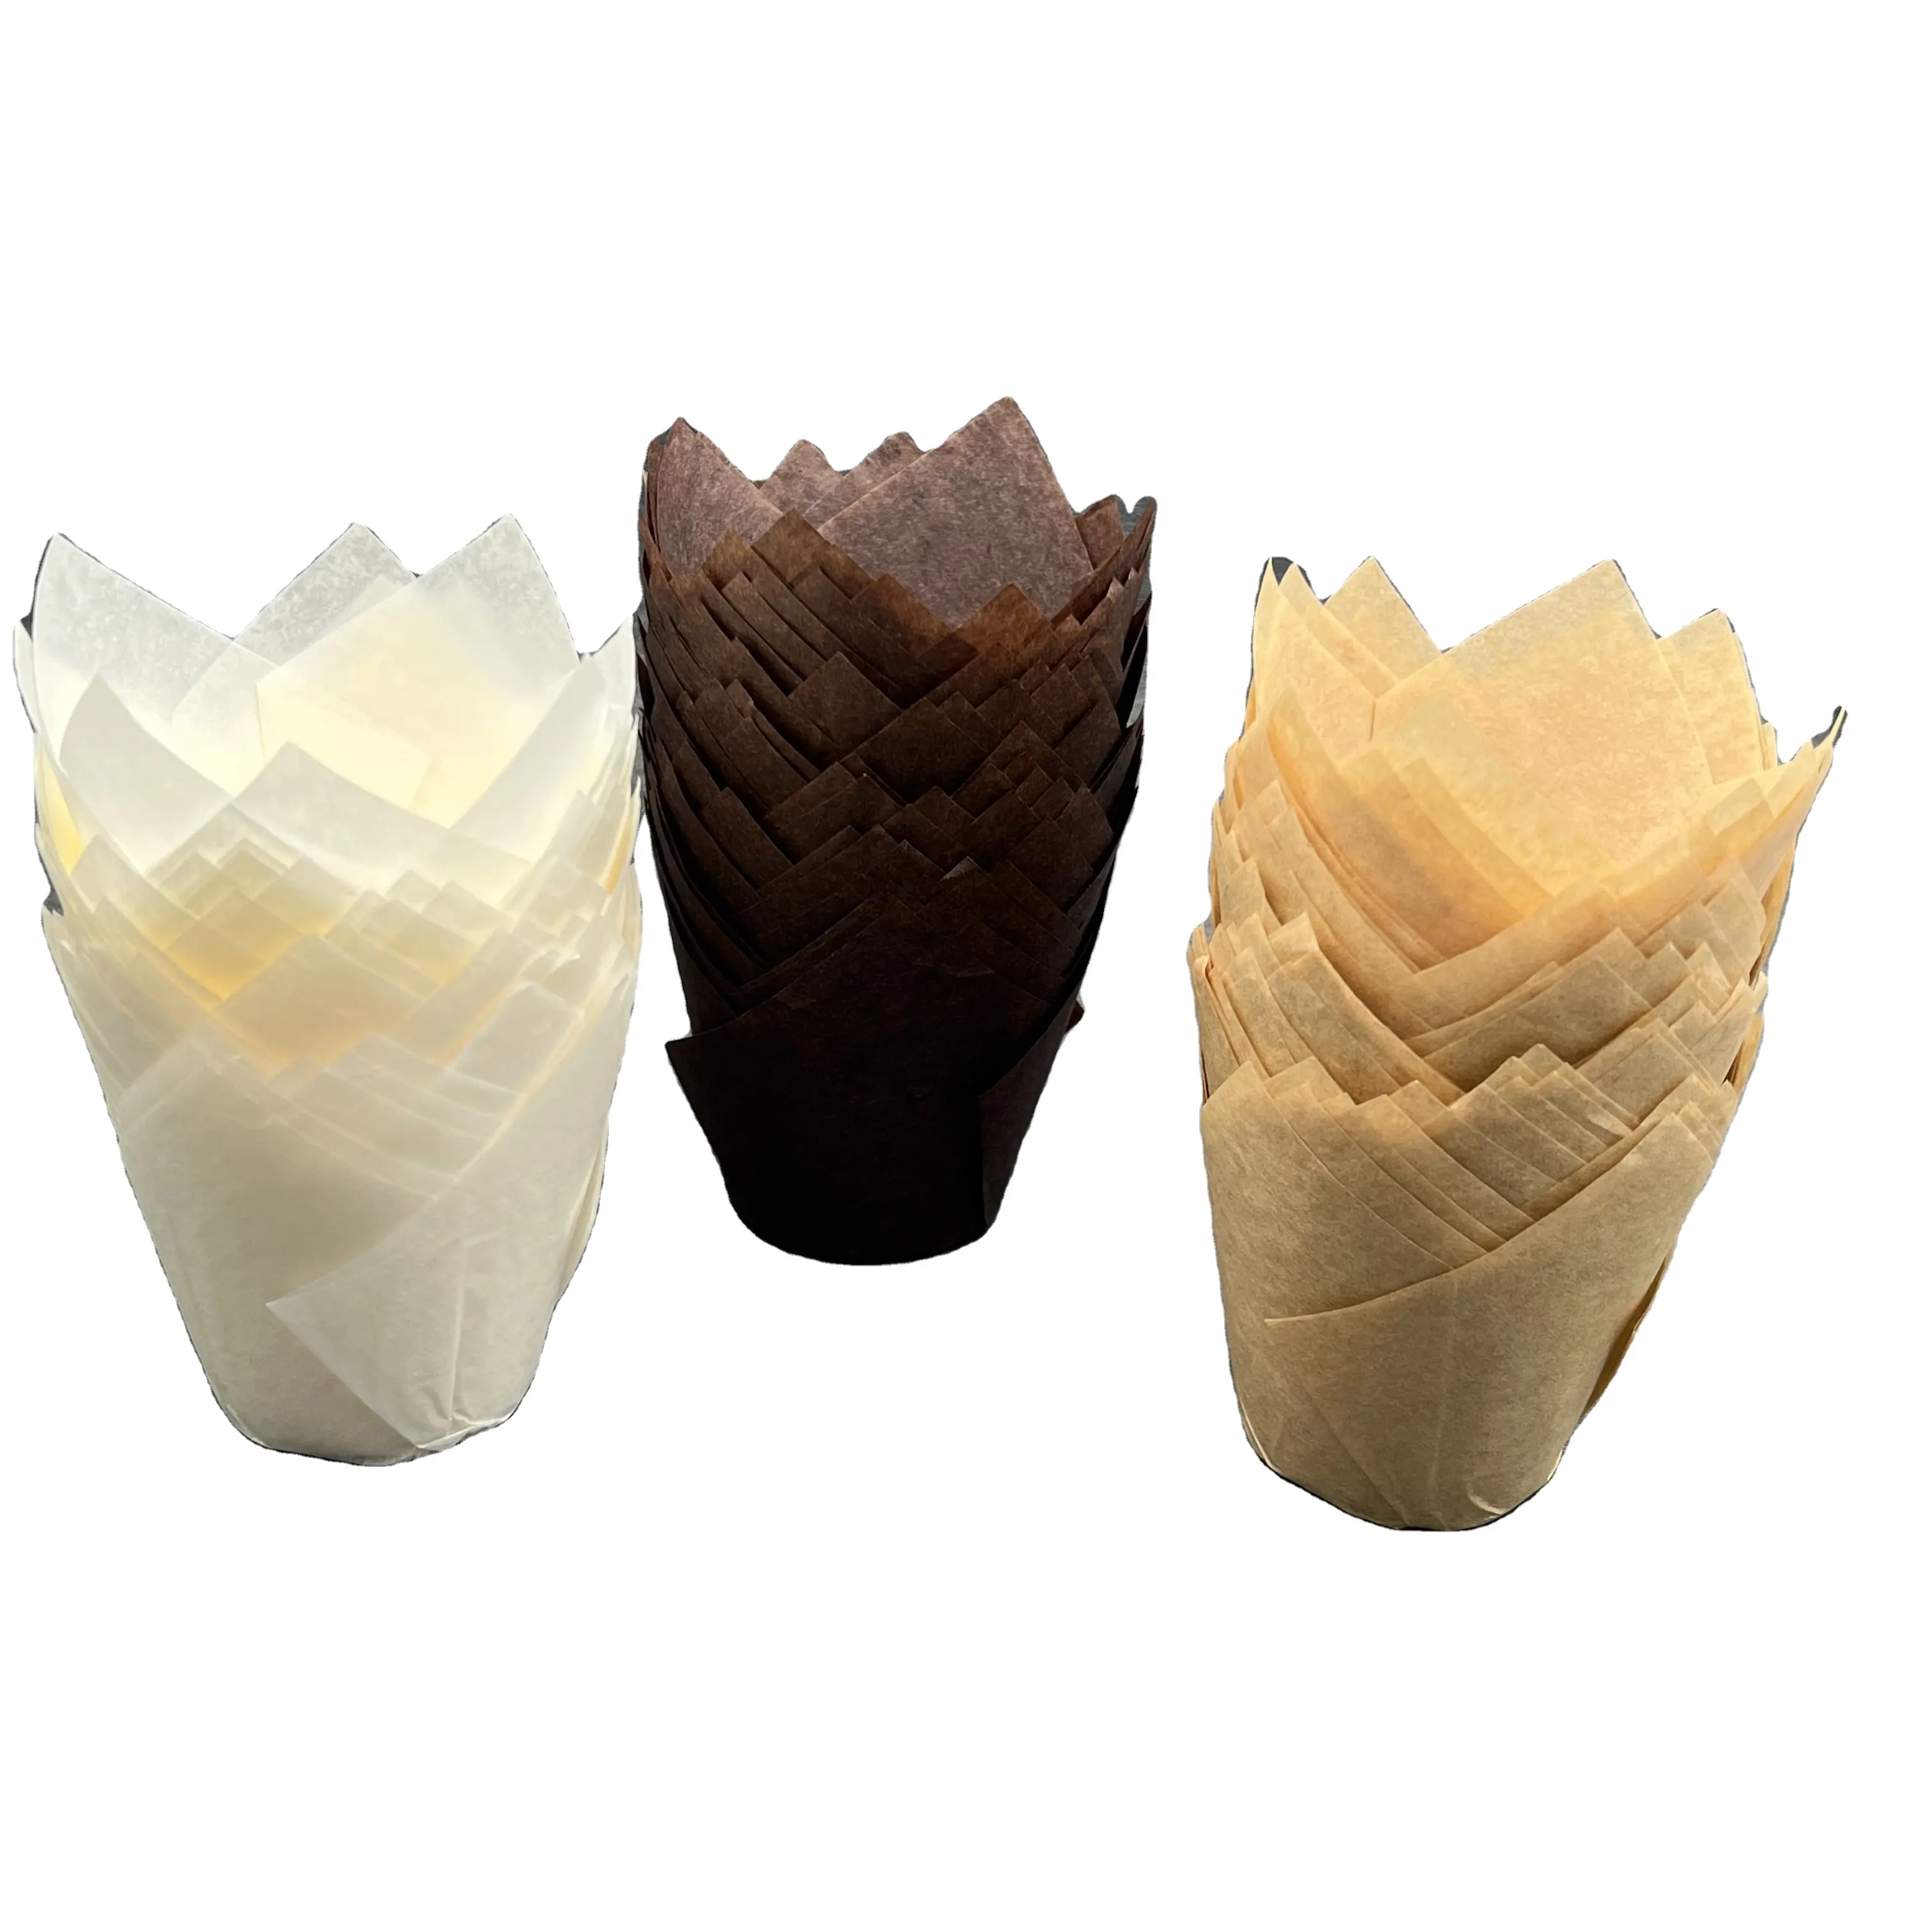 tulip paper cake cups tulip muffin liners baking tools hot sale cupcake baking liners